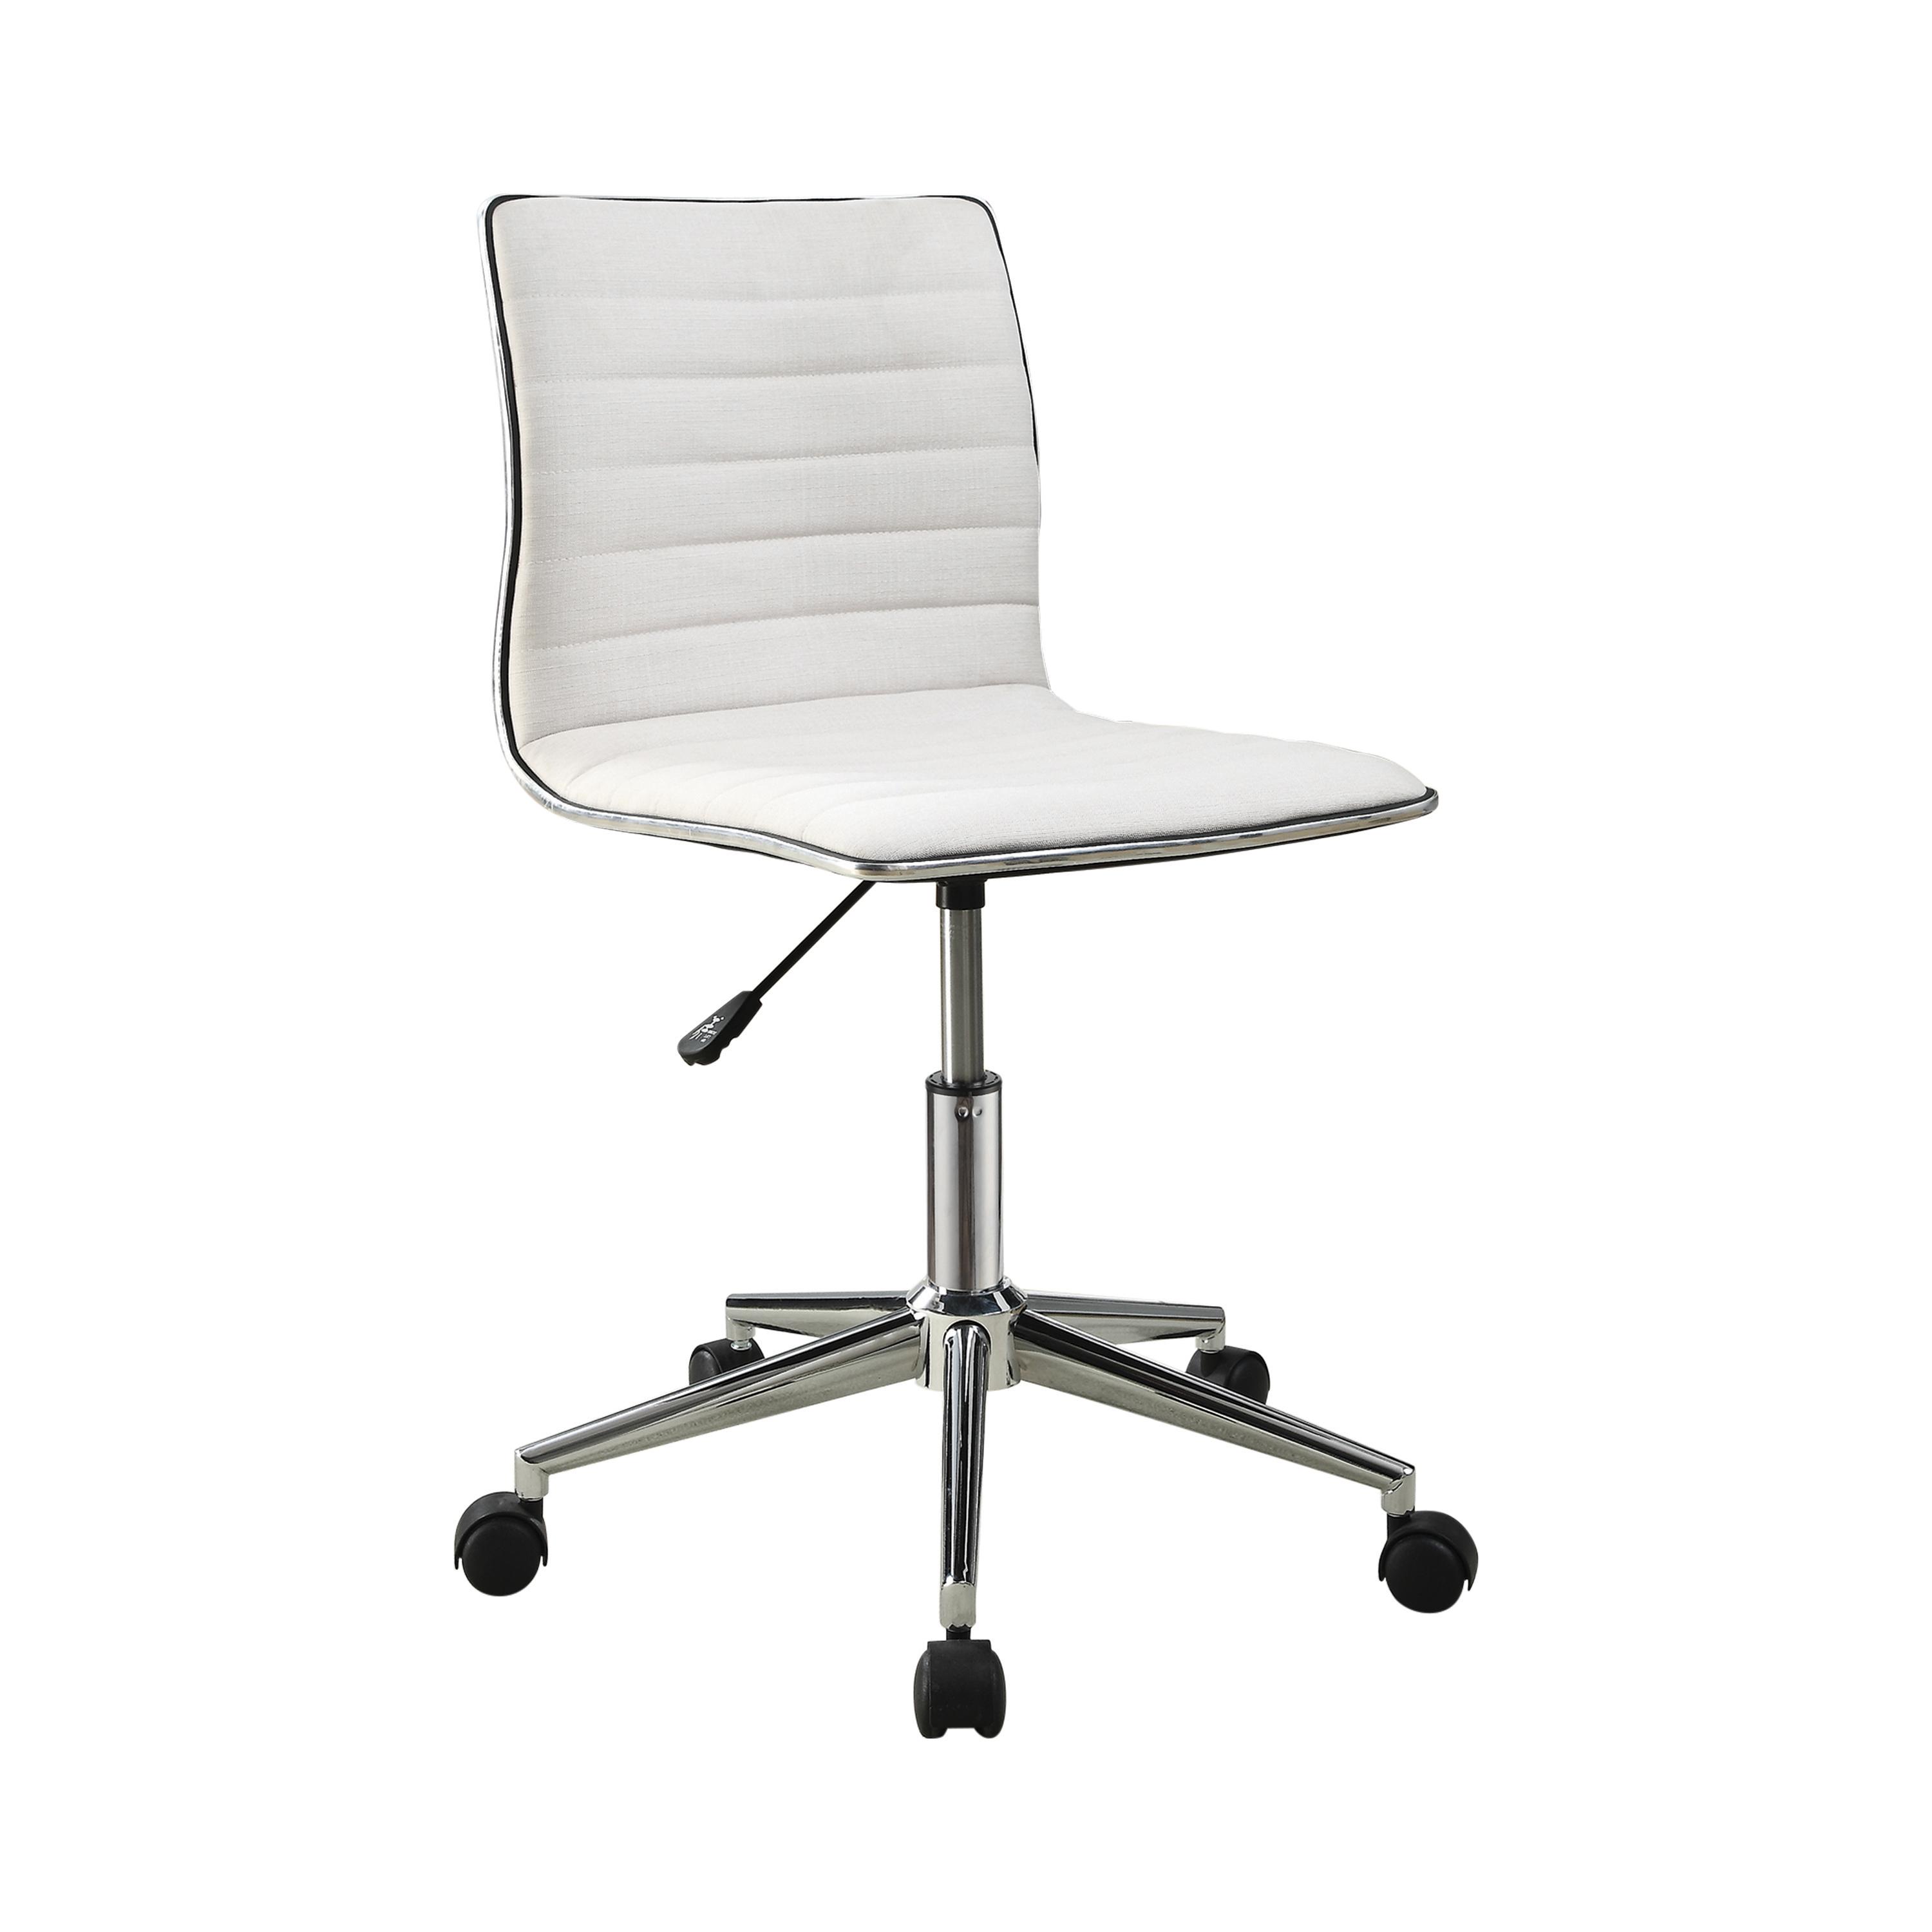 Contemporary Office Chair 800726 800726 in White Fabric